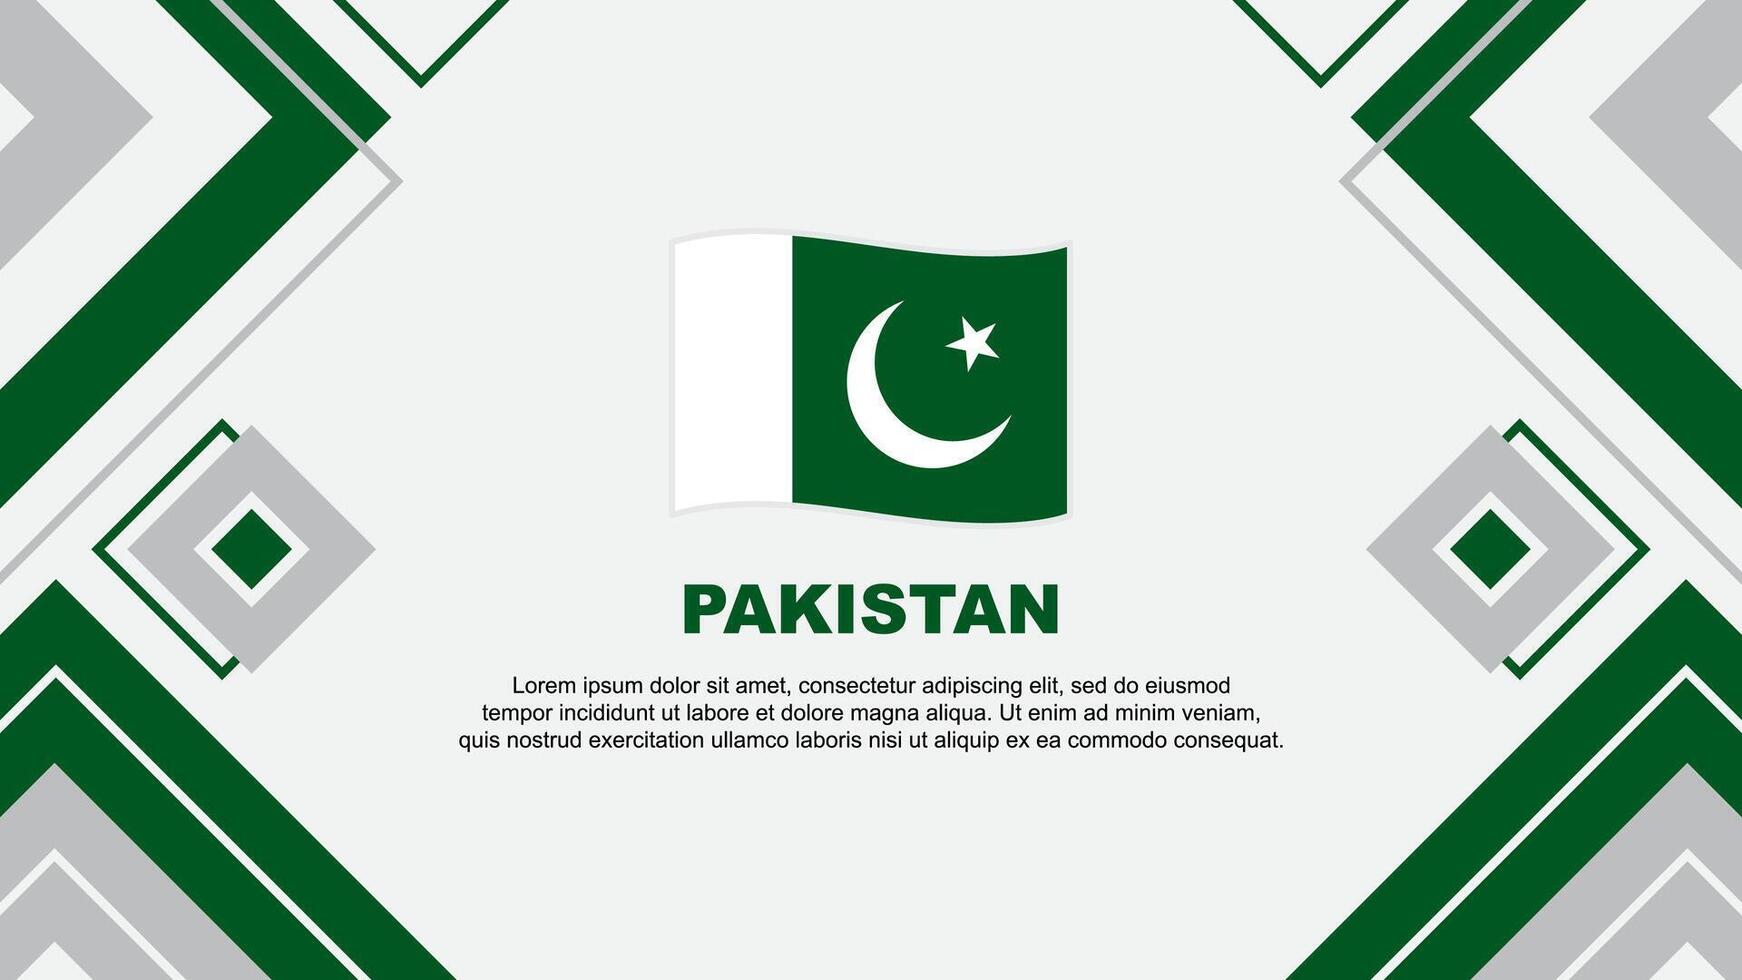 Pakistan Flag Abstract Background Design Template. Pakistan Independence Day Banner Wallpaper Vector Illustration. Pakistan Background